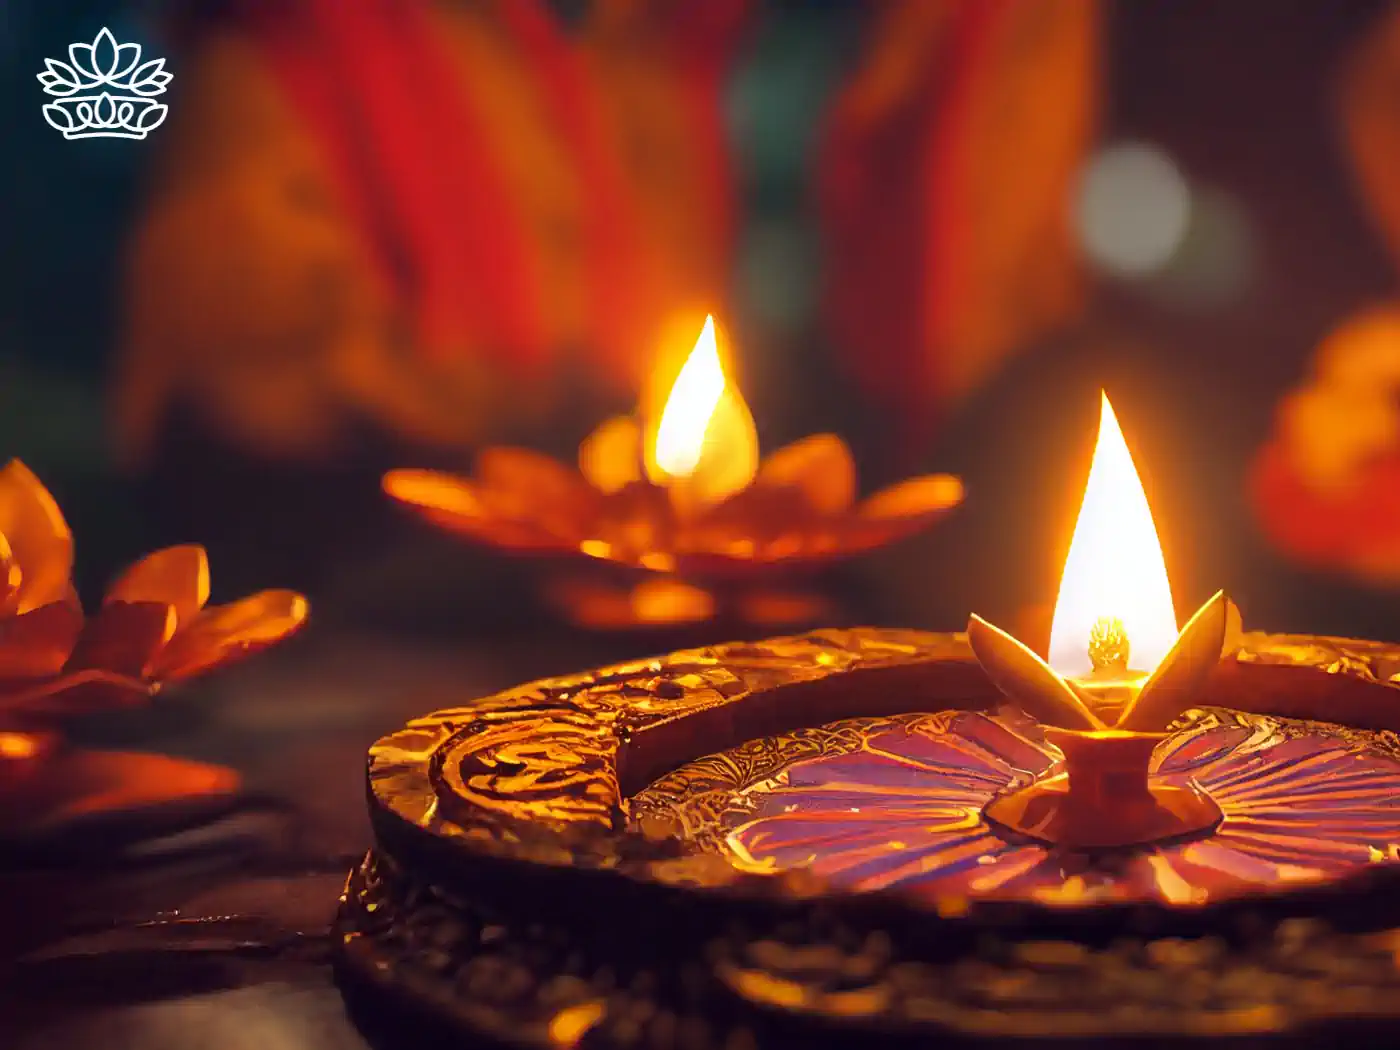 Traditional Diwali clay lamps aglow during the Festival of Lights, symbolizing the triumph of light over darkness, beautifully captured to enhance the festive spirit. Diwali. Delivered with Heart by Fabulous Flowers and Gifts.